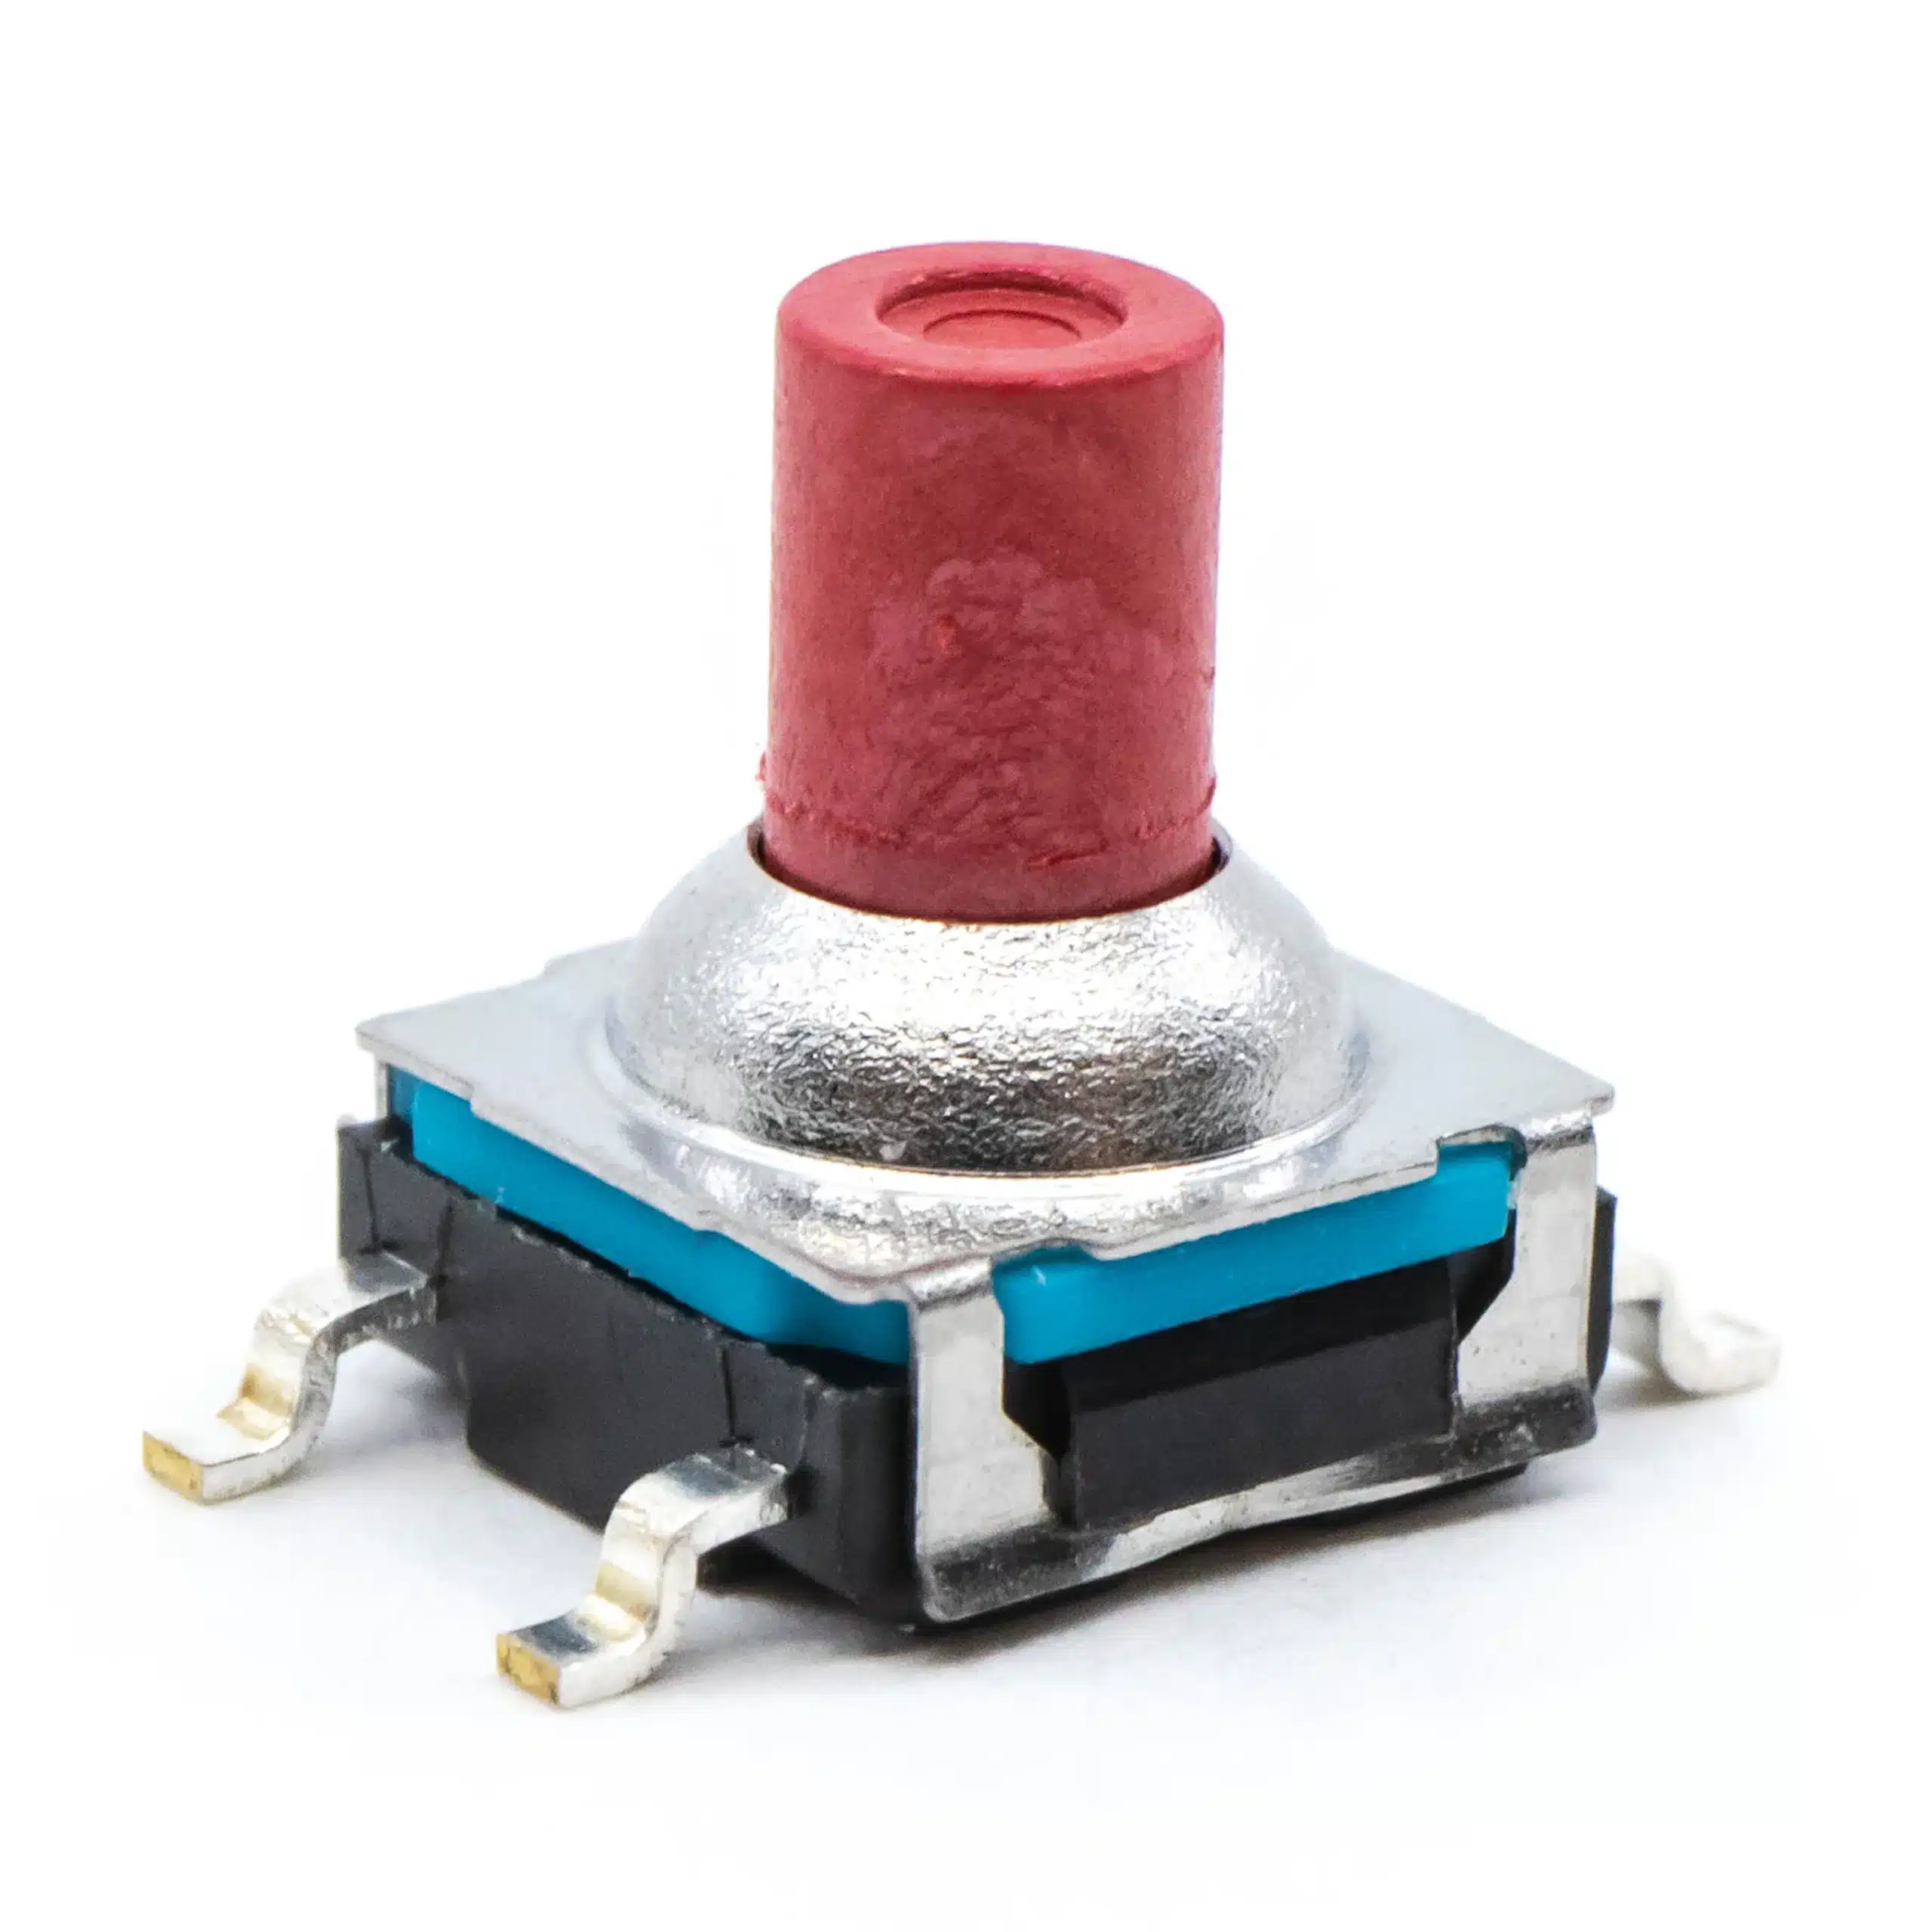 TL6170 Series Mid-sized, Sealed Tactile Switch with Tall Actuator